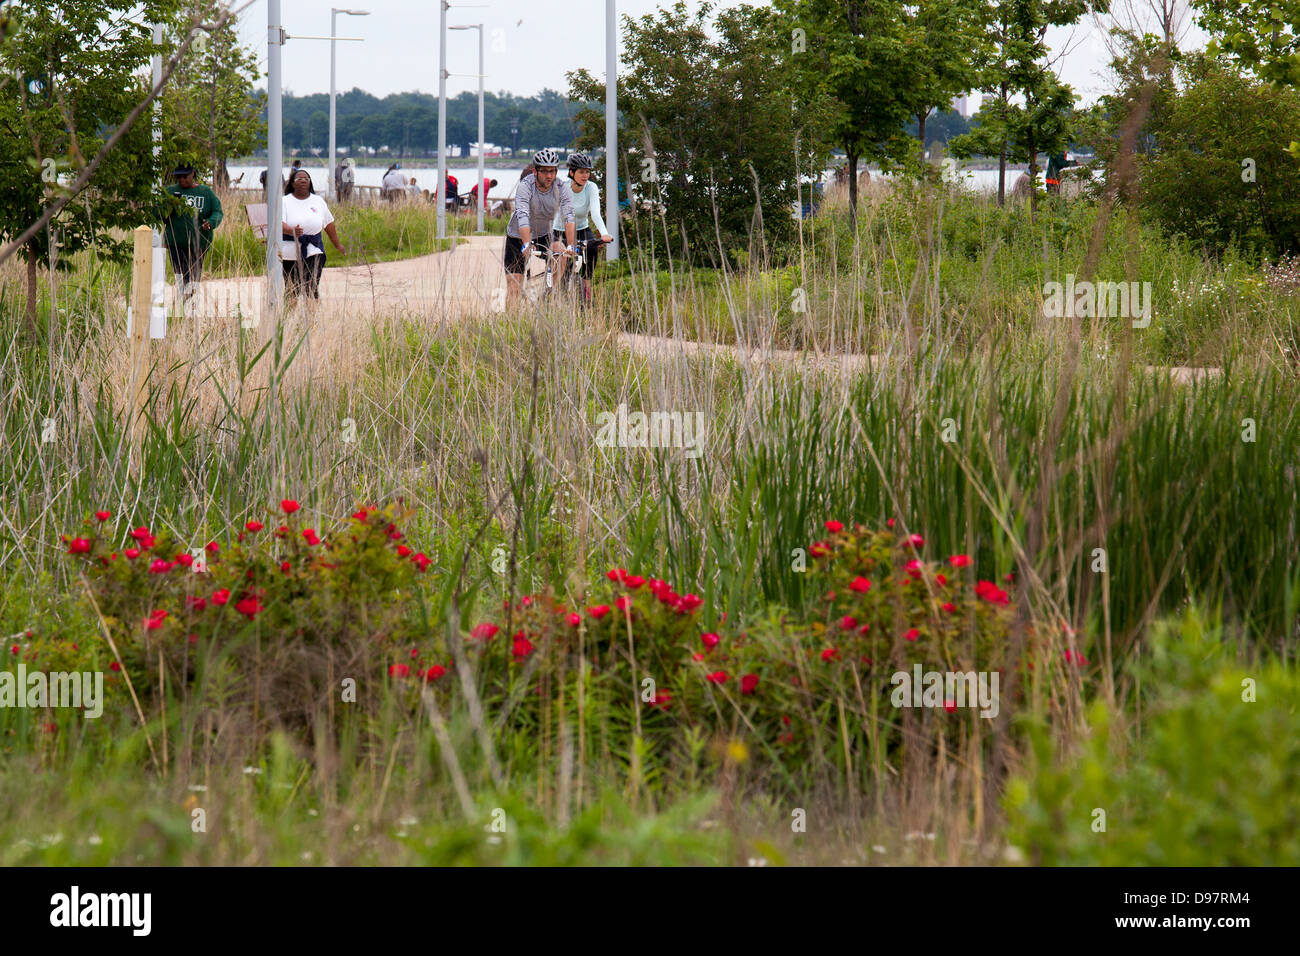 Detroit, Michigan - Cyclists and walkers in Milliken State Park, a small park beside the Detroit River in downtown Detroit. Stock Photo